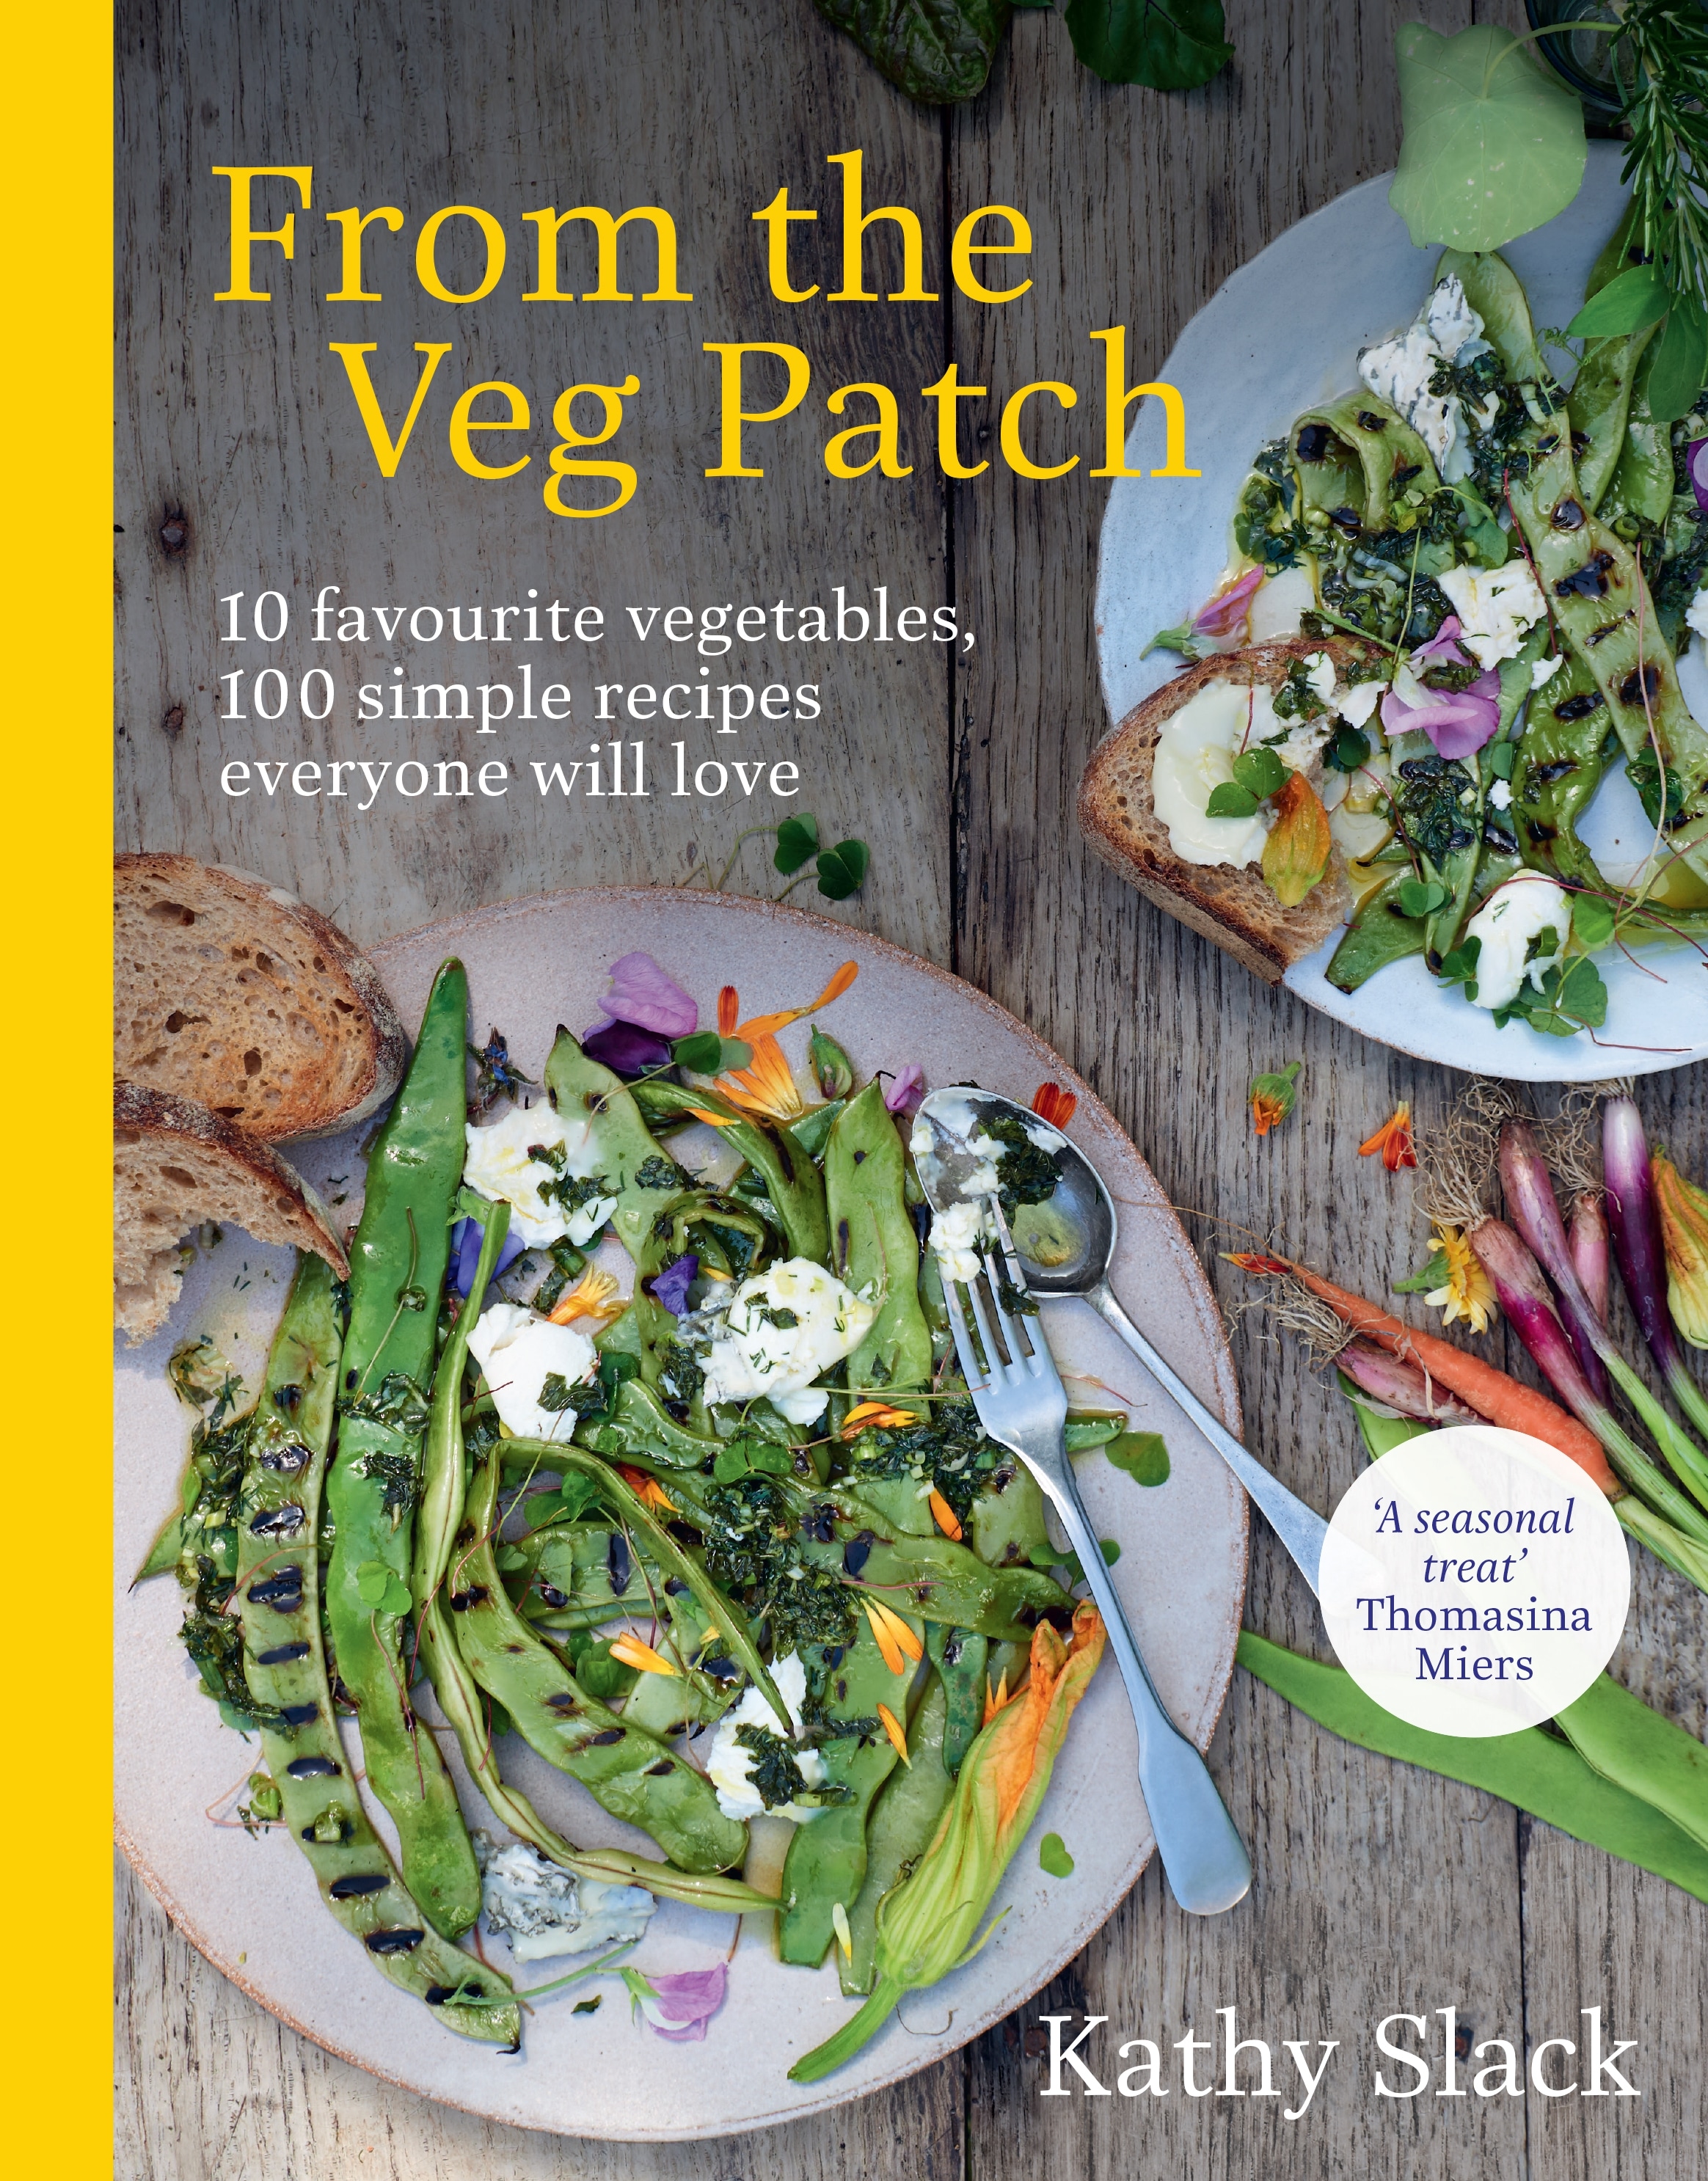 Book “From the Veg Patch” by Kathy Slack — June 10, 2021